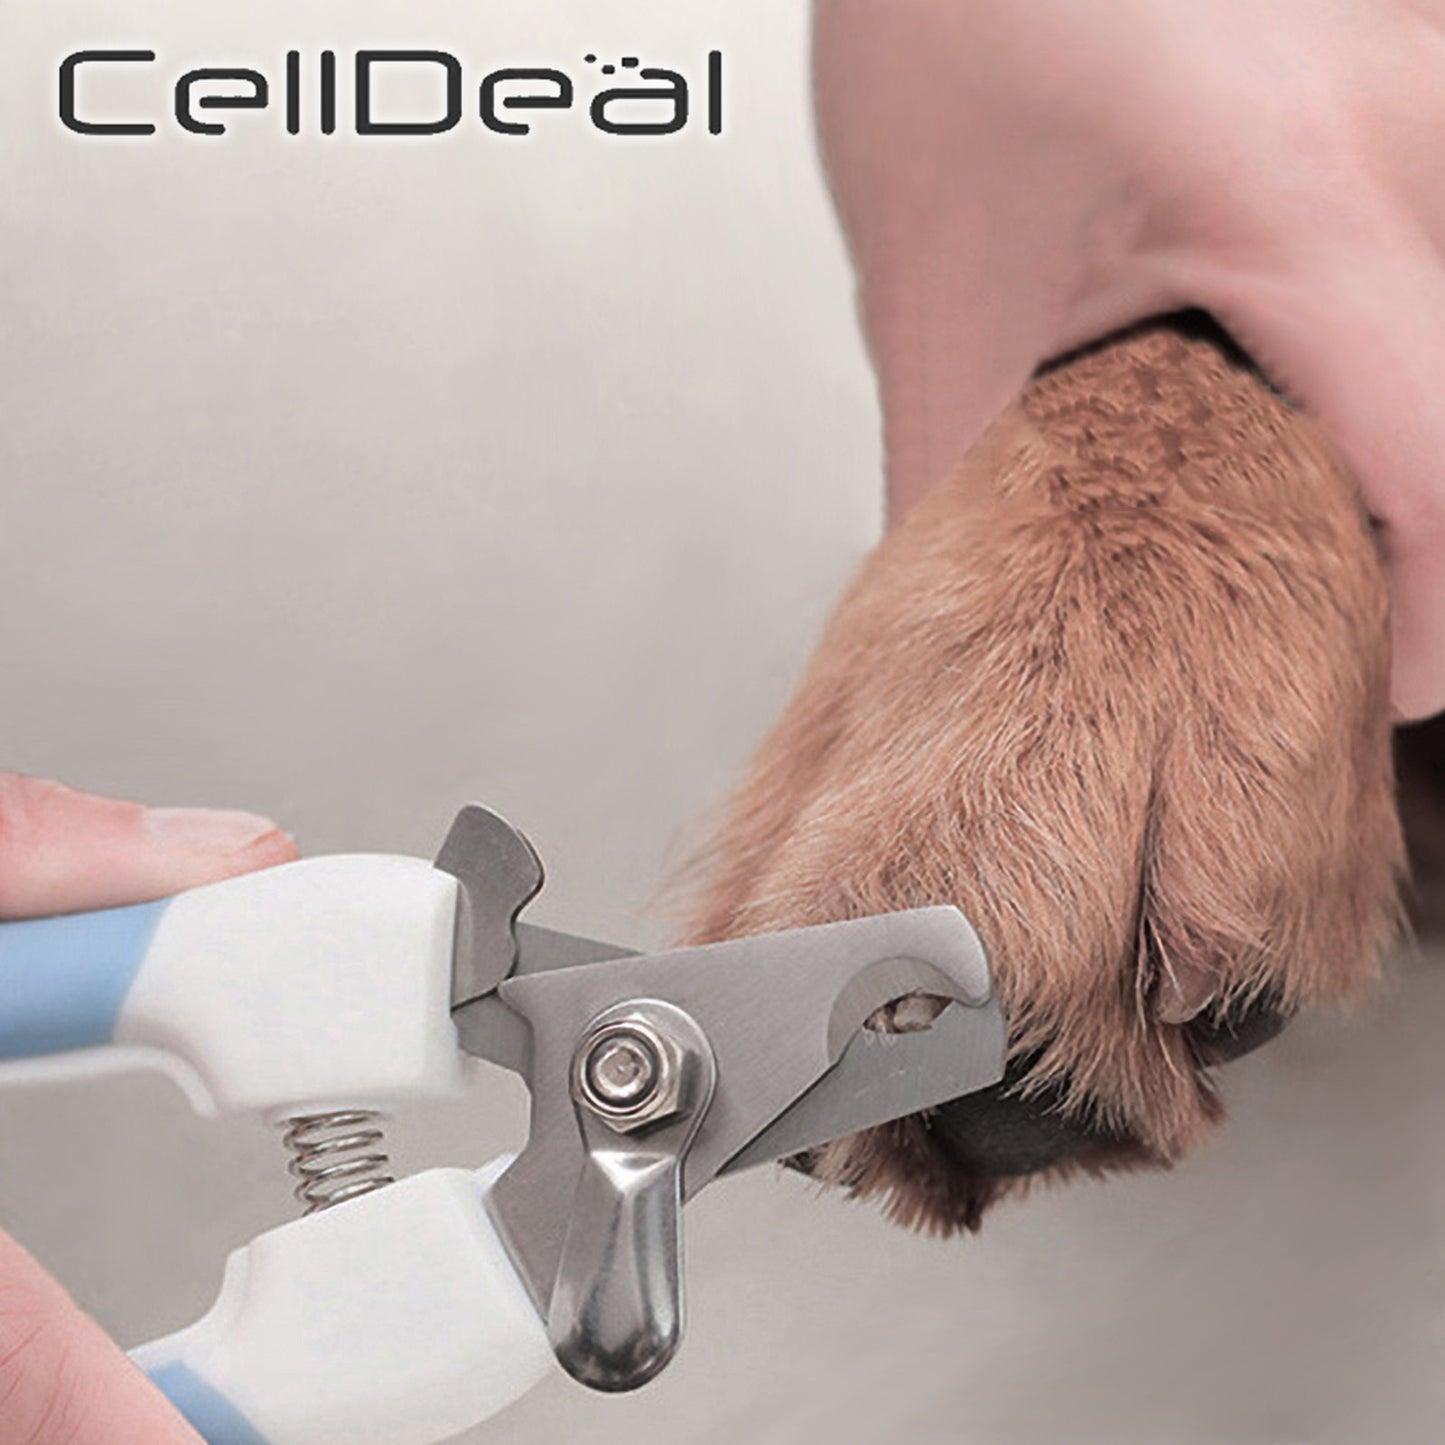 Professional two color stainless steel pet nail clippers.